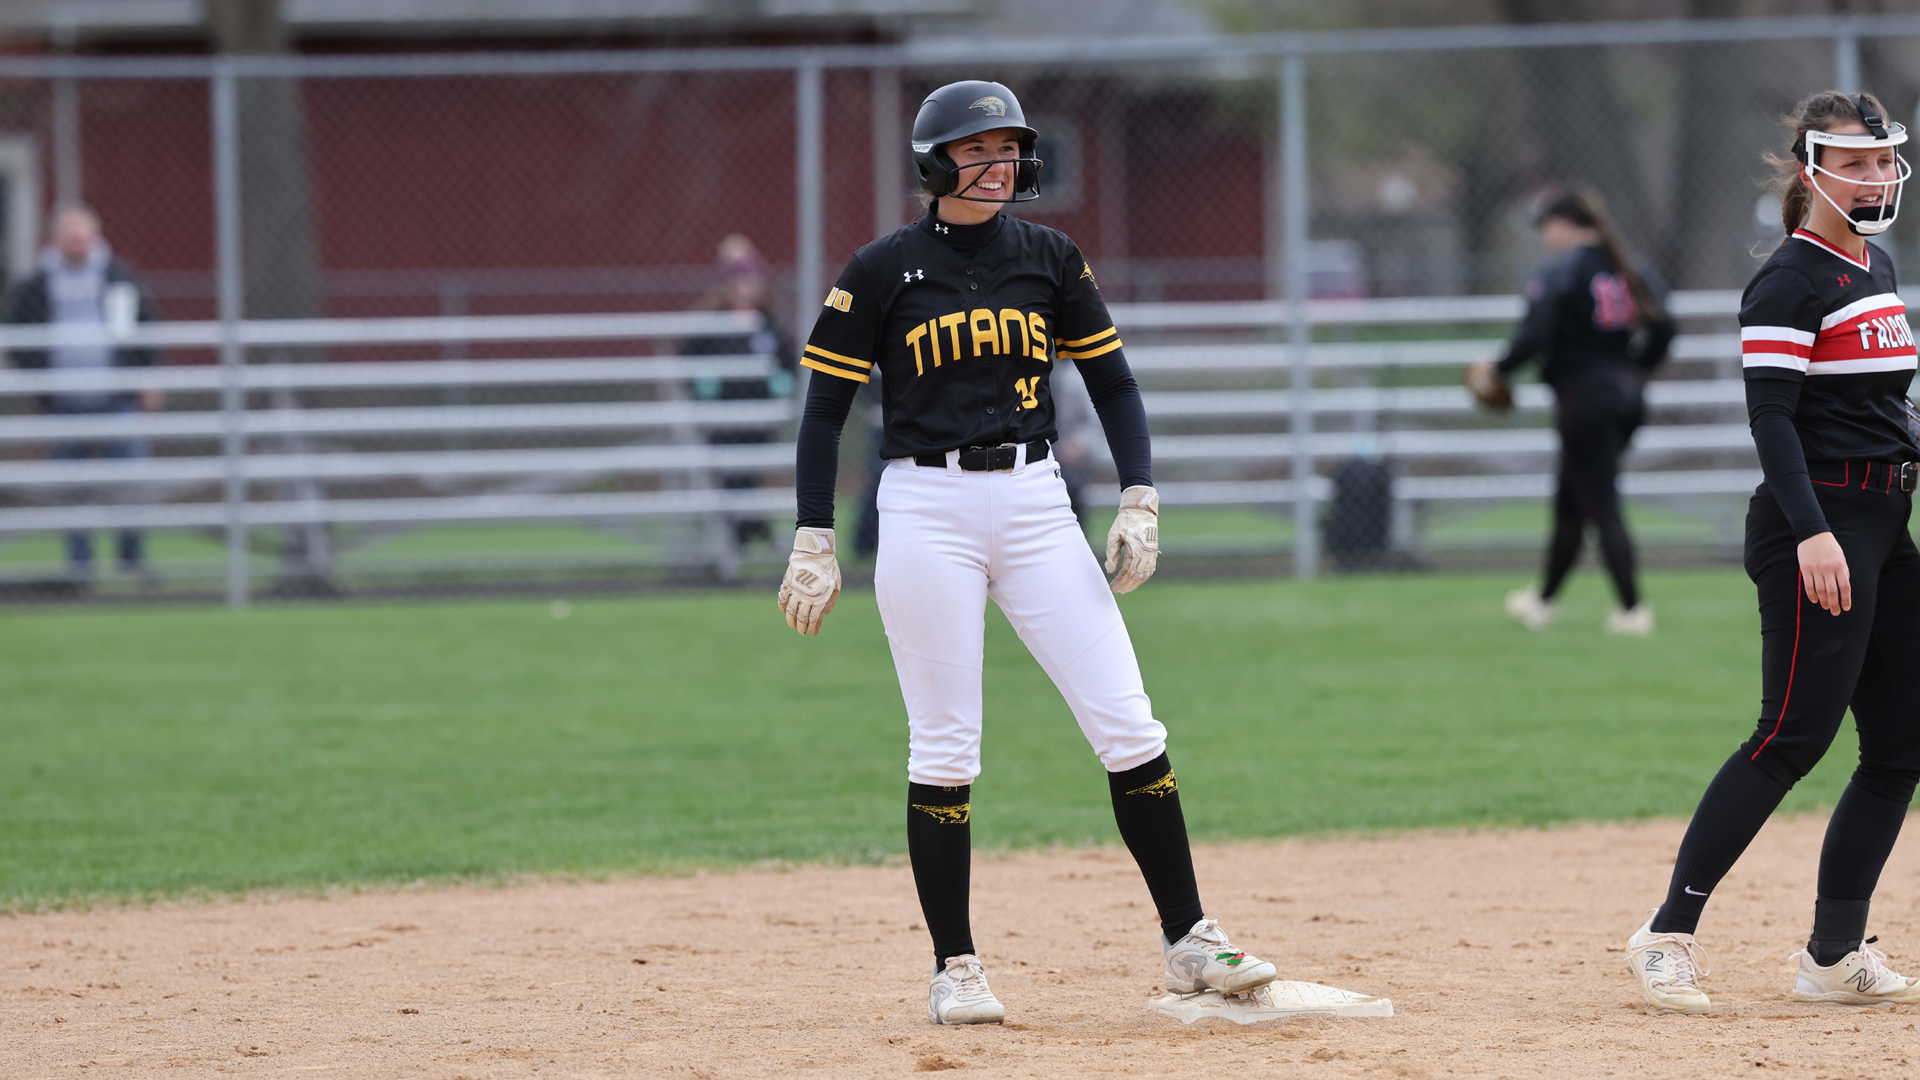 Sydney Rau went 6-of-7 with three runs, two RBIs, a triple and 2 stolen bases in the Titans' sweep of the Falcons on Saturday. Photo Credit: Steve Frommell, UW-Oshkosh Sports Information